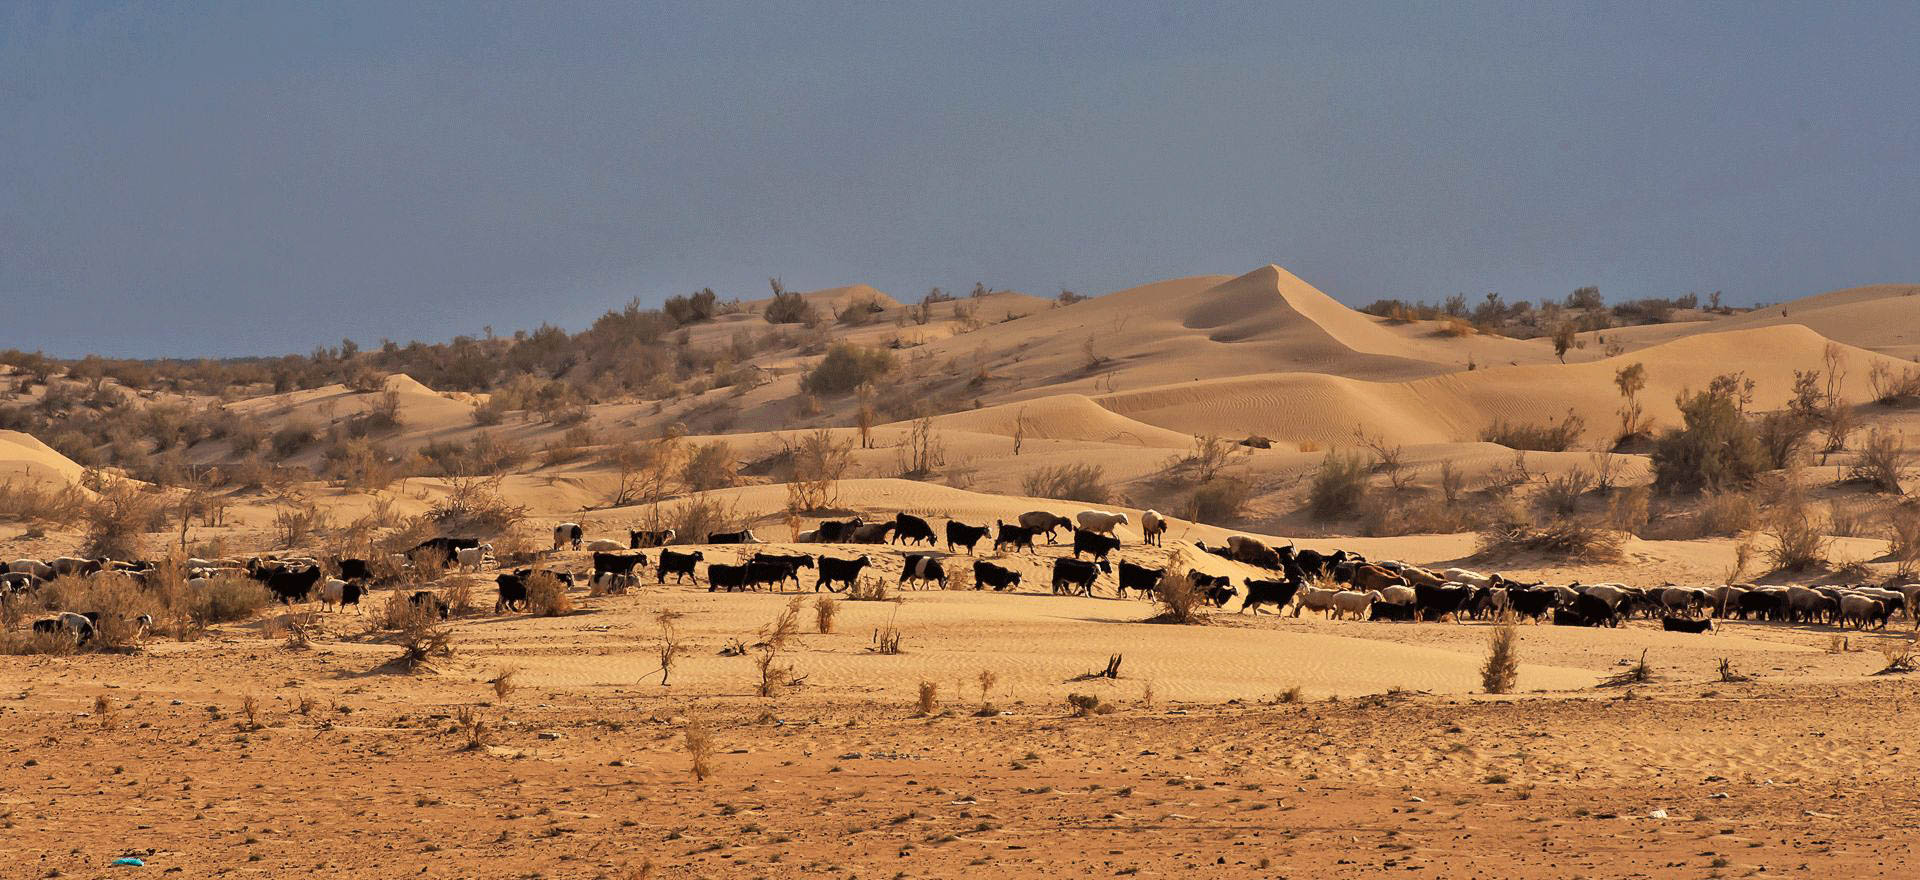 Herd of goats in the desert - Turkmenistan Holidays and Tours